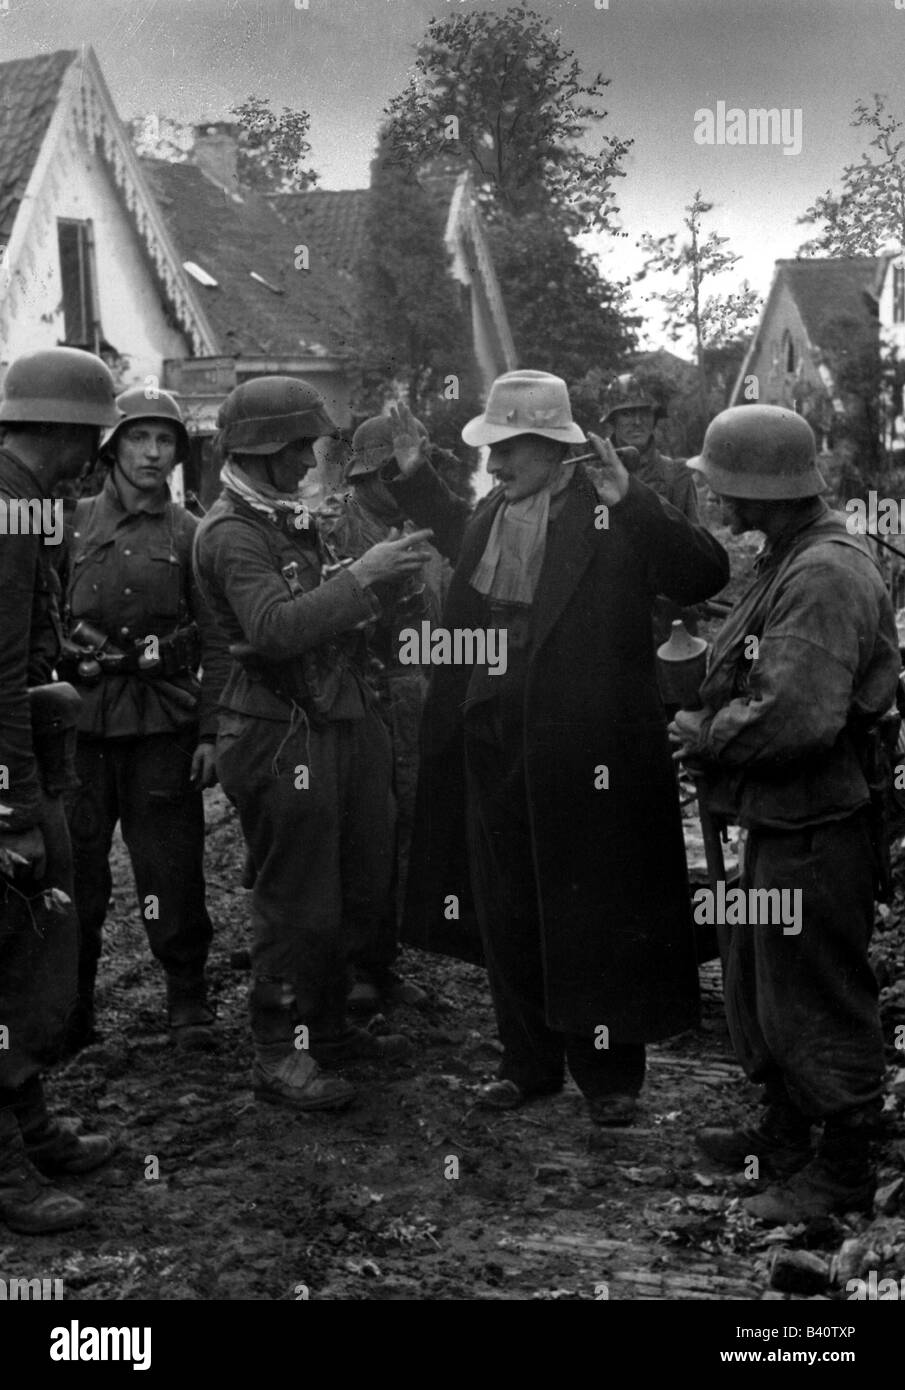 events, Second World War / WWII, Netherlands, Arnhem, 17. - 25.9.1944, Captain Barry Ingram, commander of the 1st Border Mortar Group, is being captured in civilian clothes by Waffen-SS troopers, Oosterbeek, 25./26.9.1944, Stock Photo